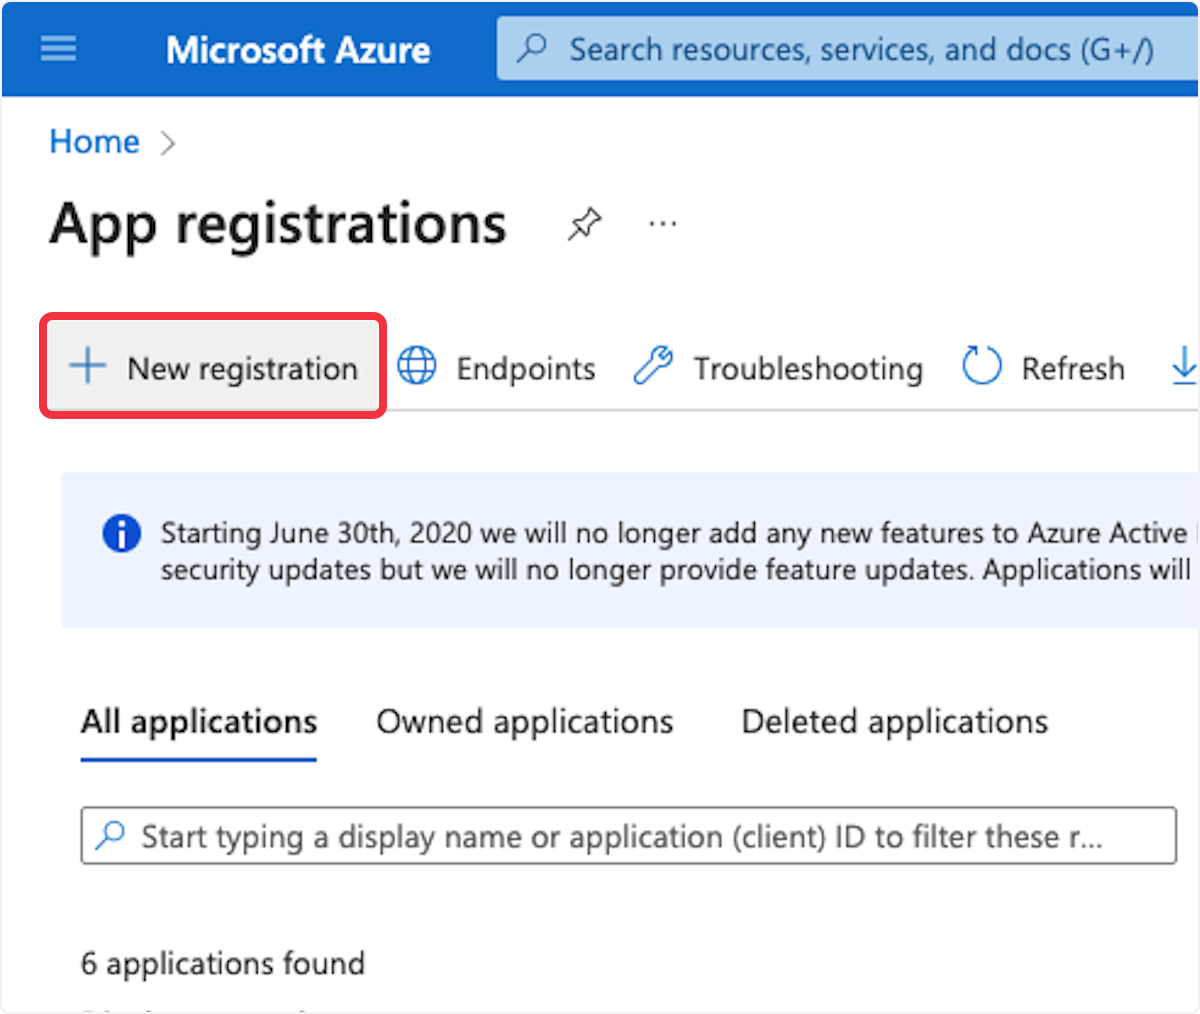 Microsoft Azure 'App registrations' page with an option for 'New registration' highlighted for adding a new application.